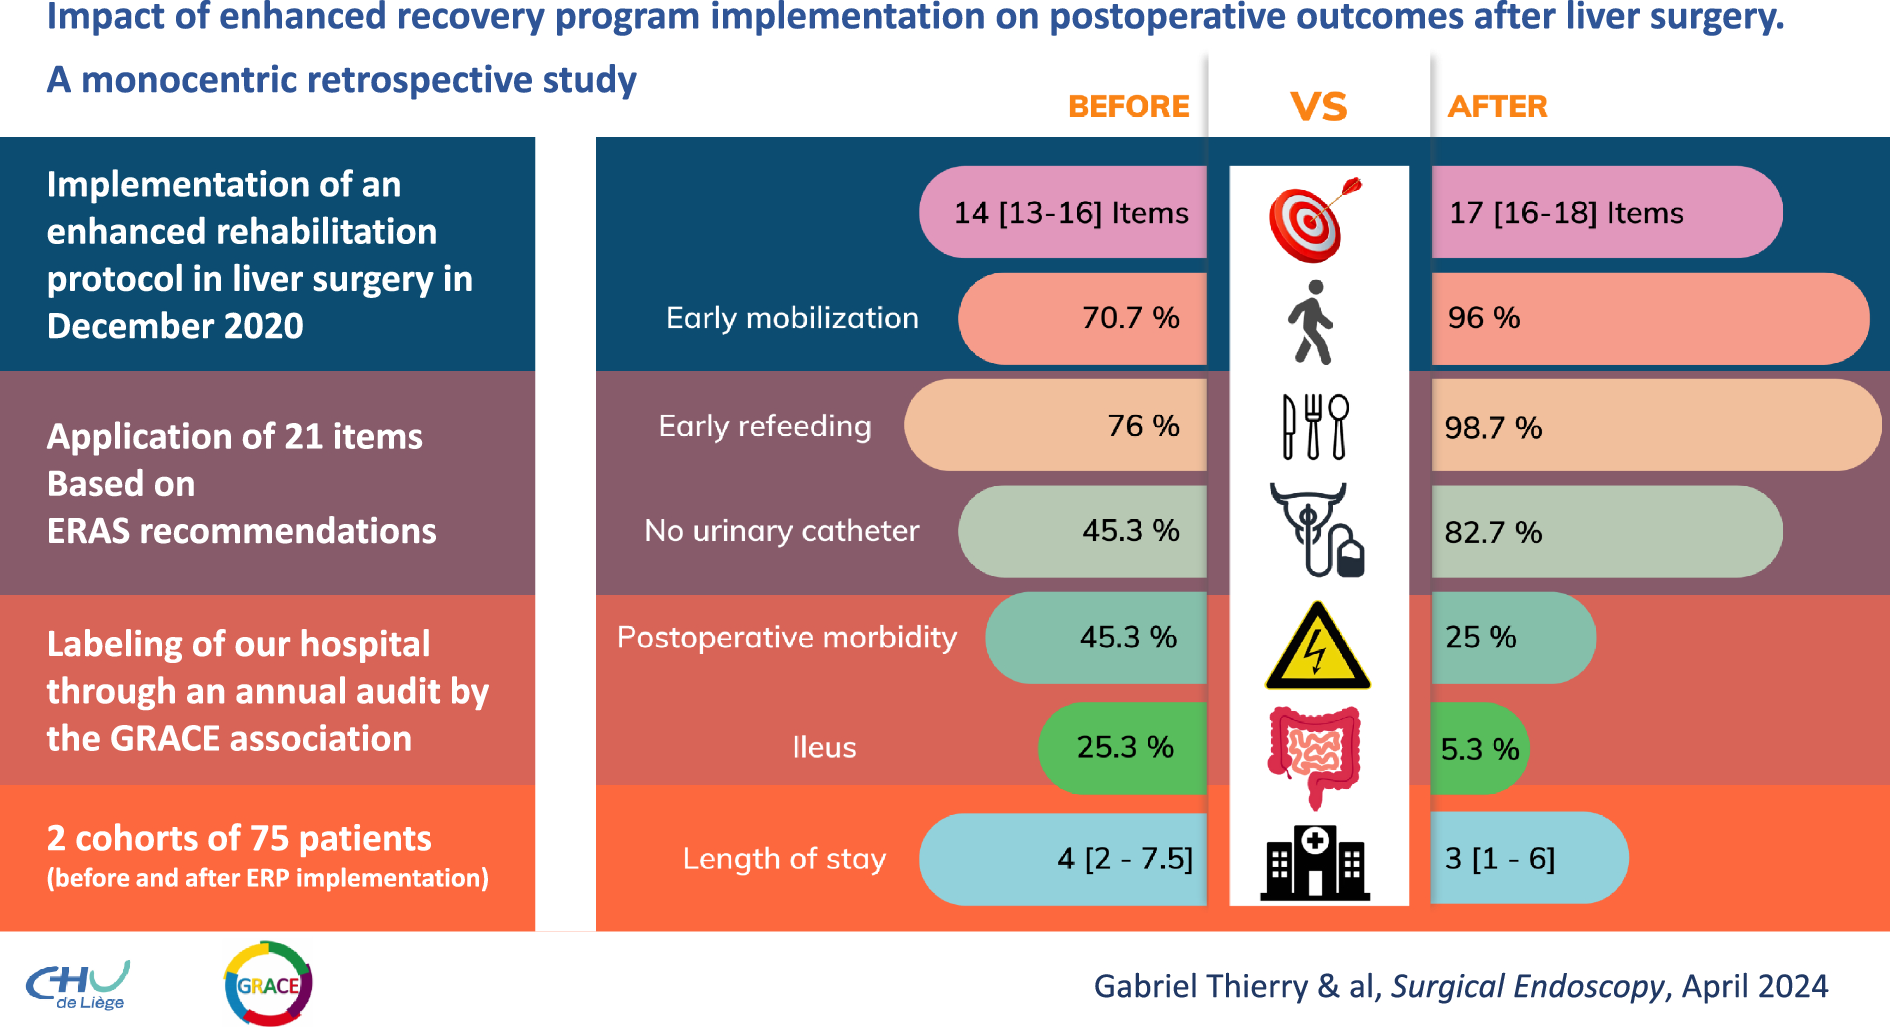 Impact of enhanced recovery program implementation on postoperative outcomes after liver surgery: a monocentric retrospective study